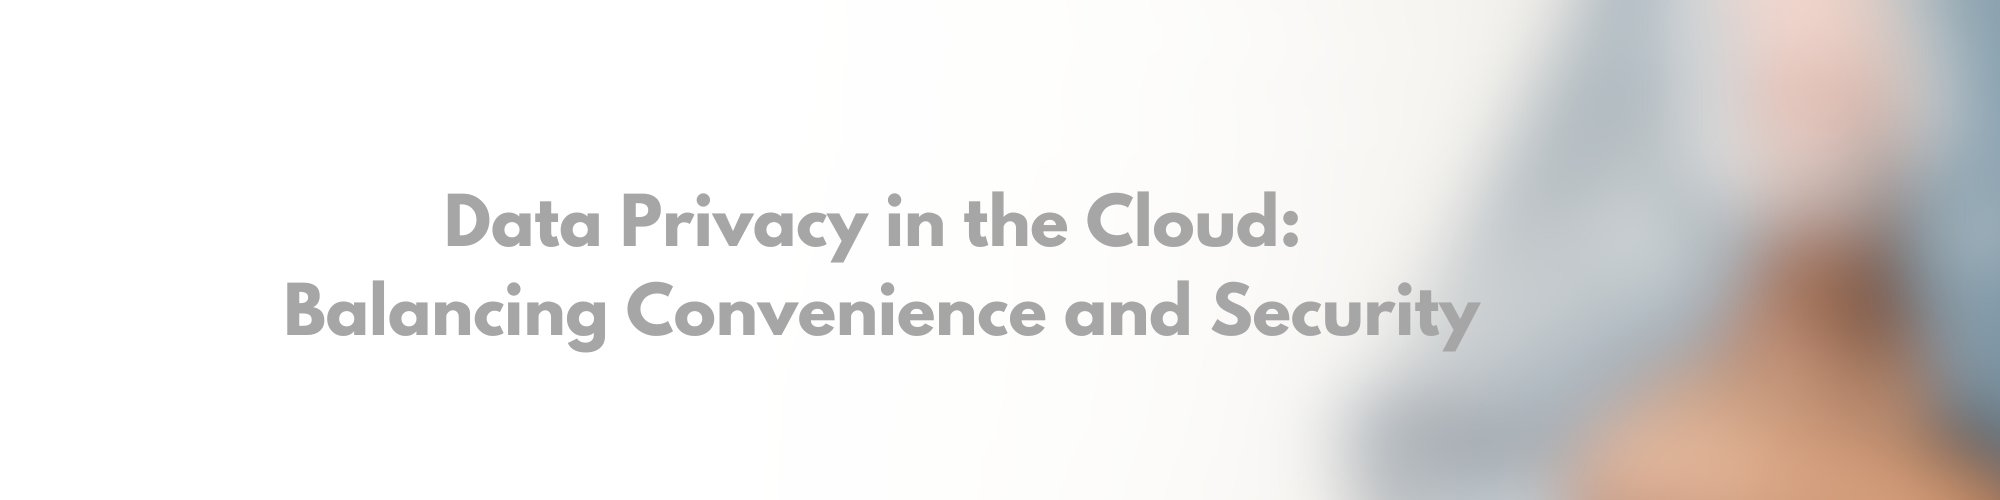 Data Privacy in the Cloud: Balancing Convenience and Security